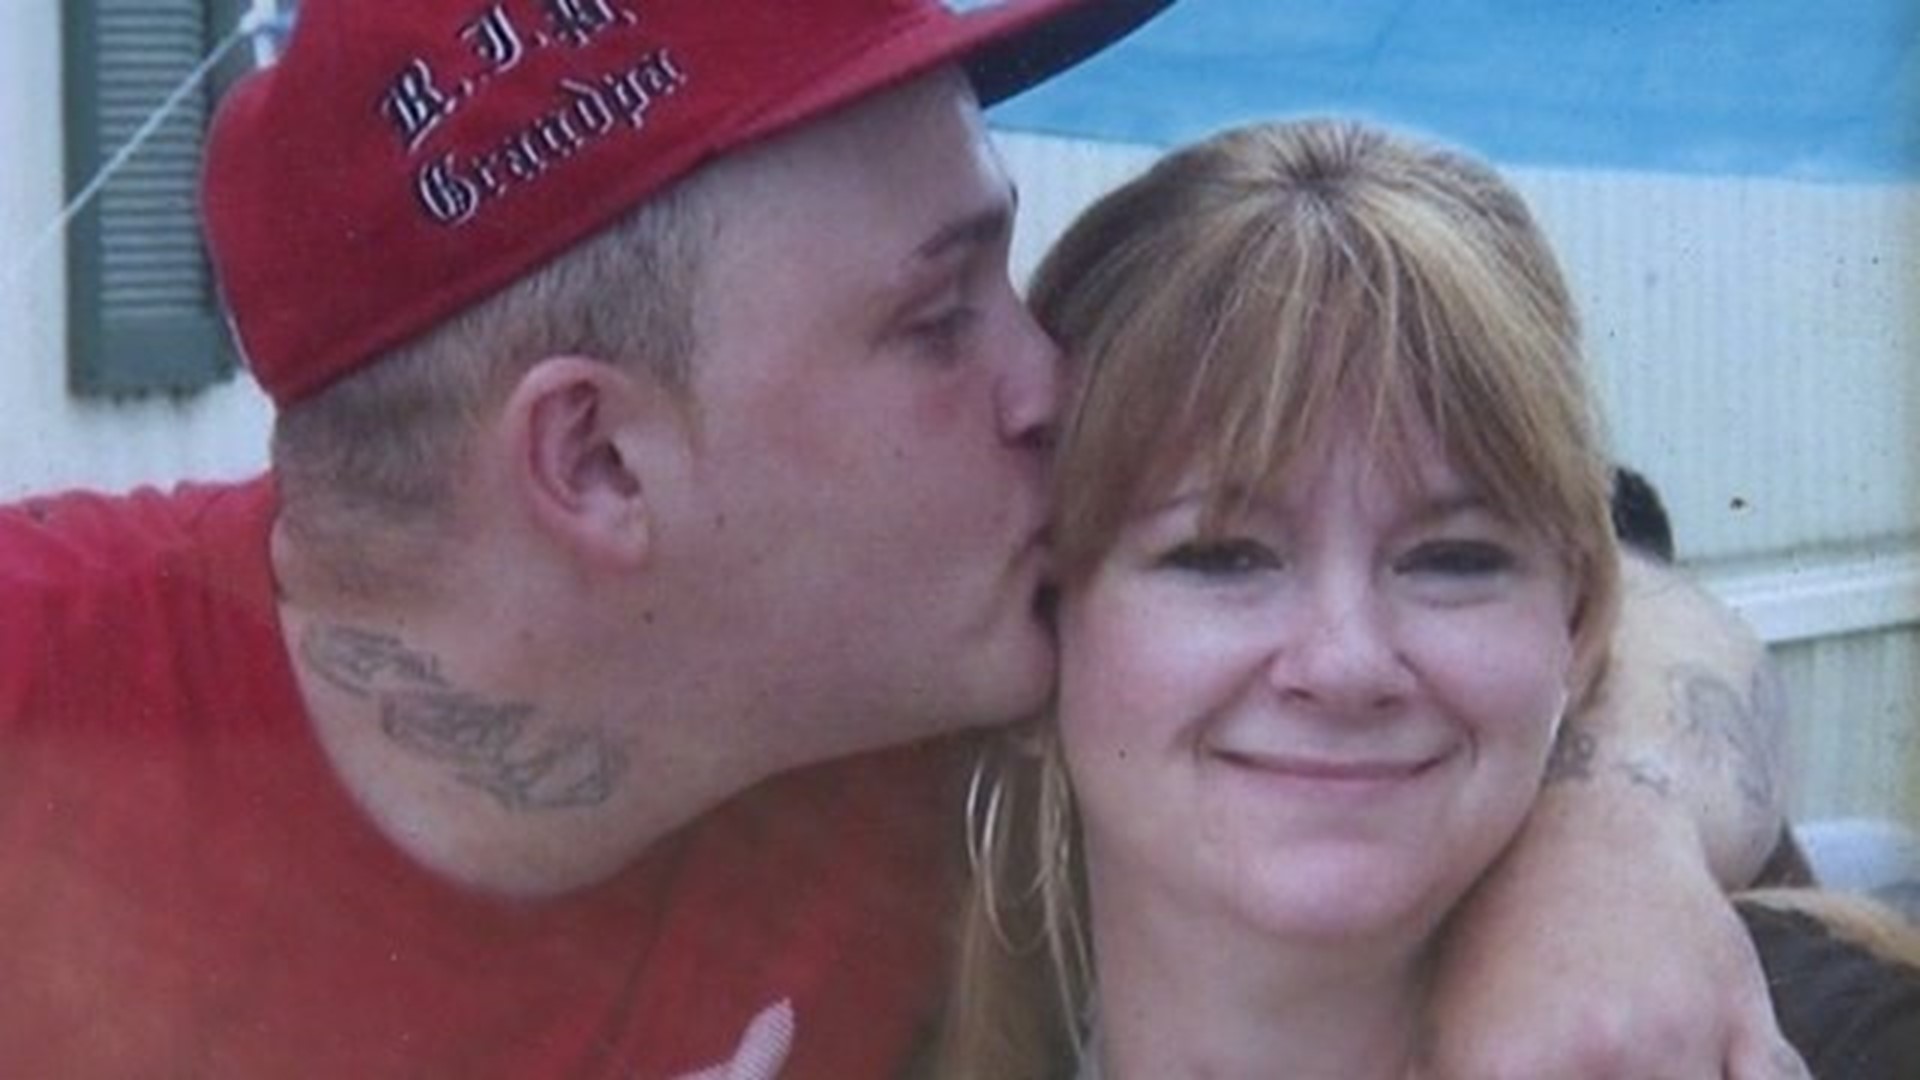 Mom grieves over sons passing, outraged his money allegedly stolen by detective